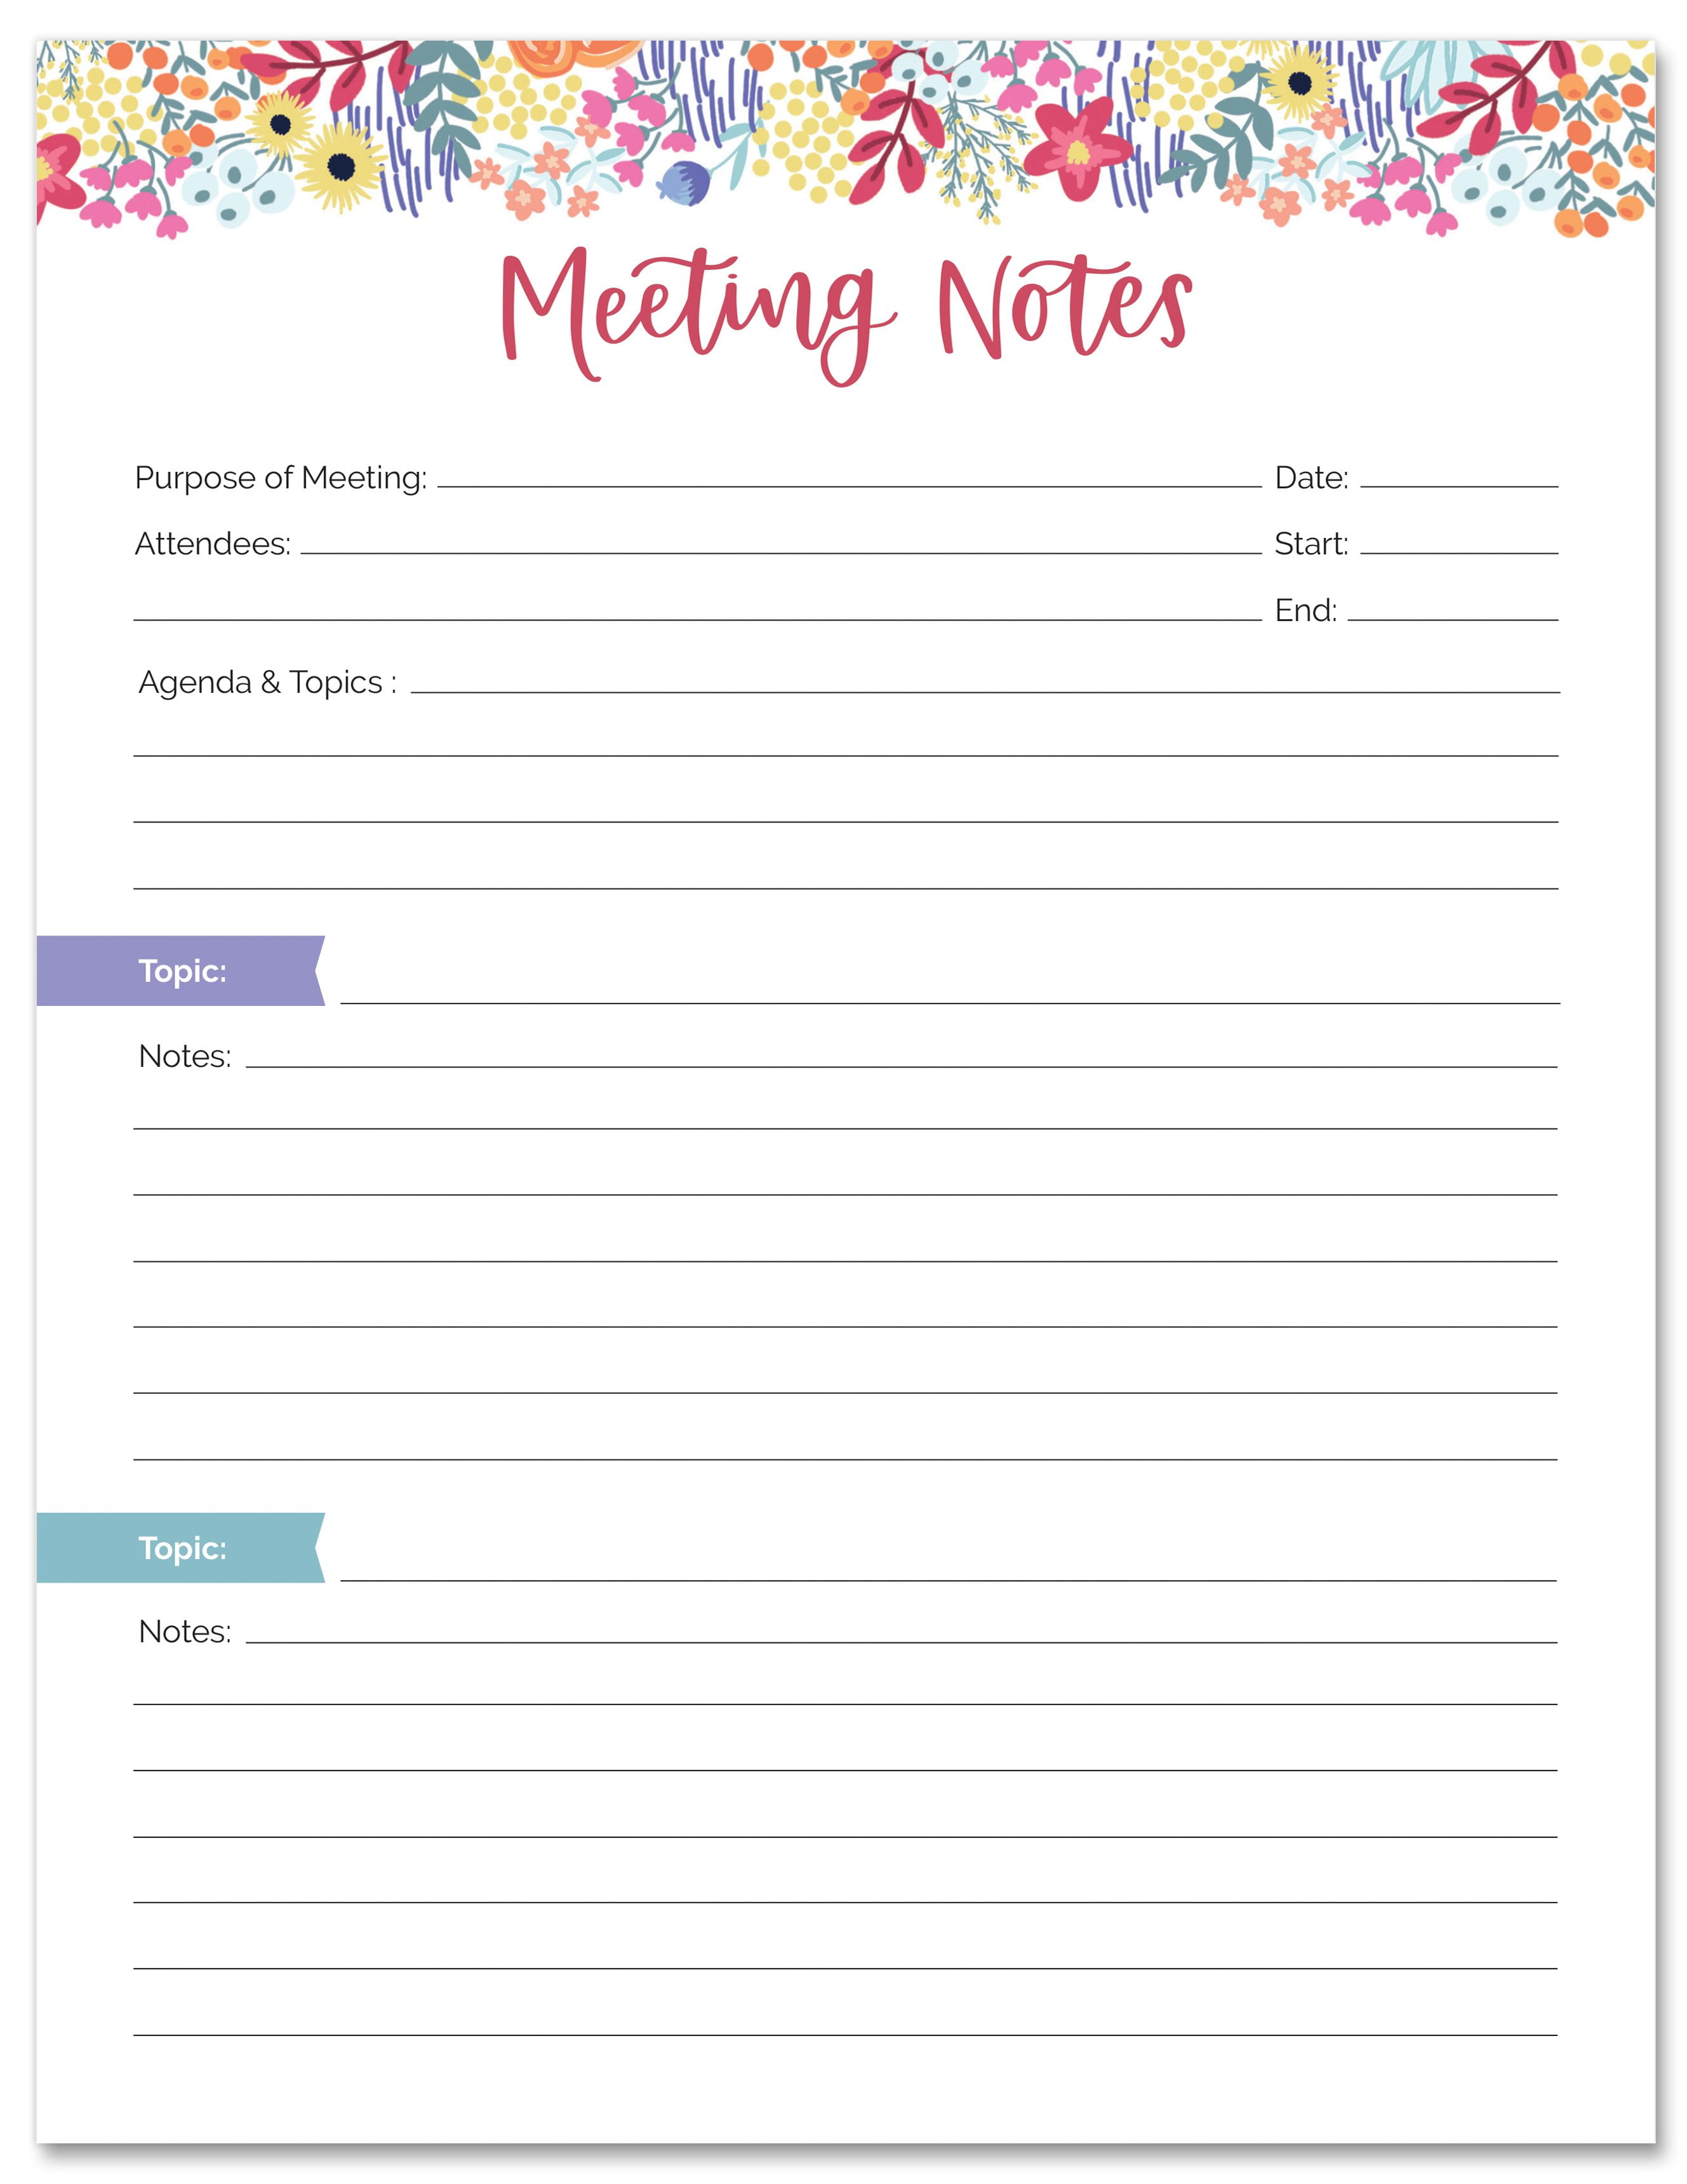 MEETING NOTES PLANNING PAD, 23.23" X 23" - bloom Throughout Meeting Note Template